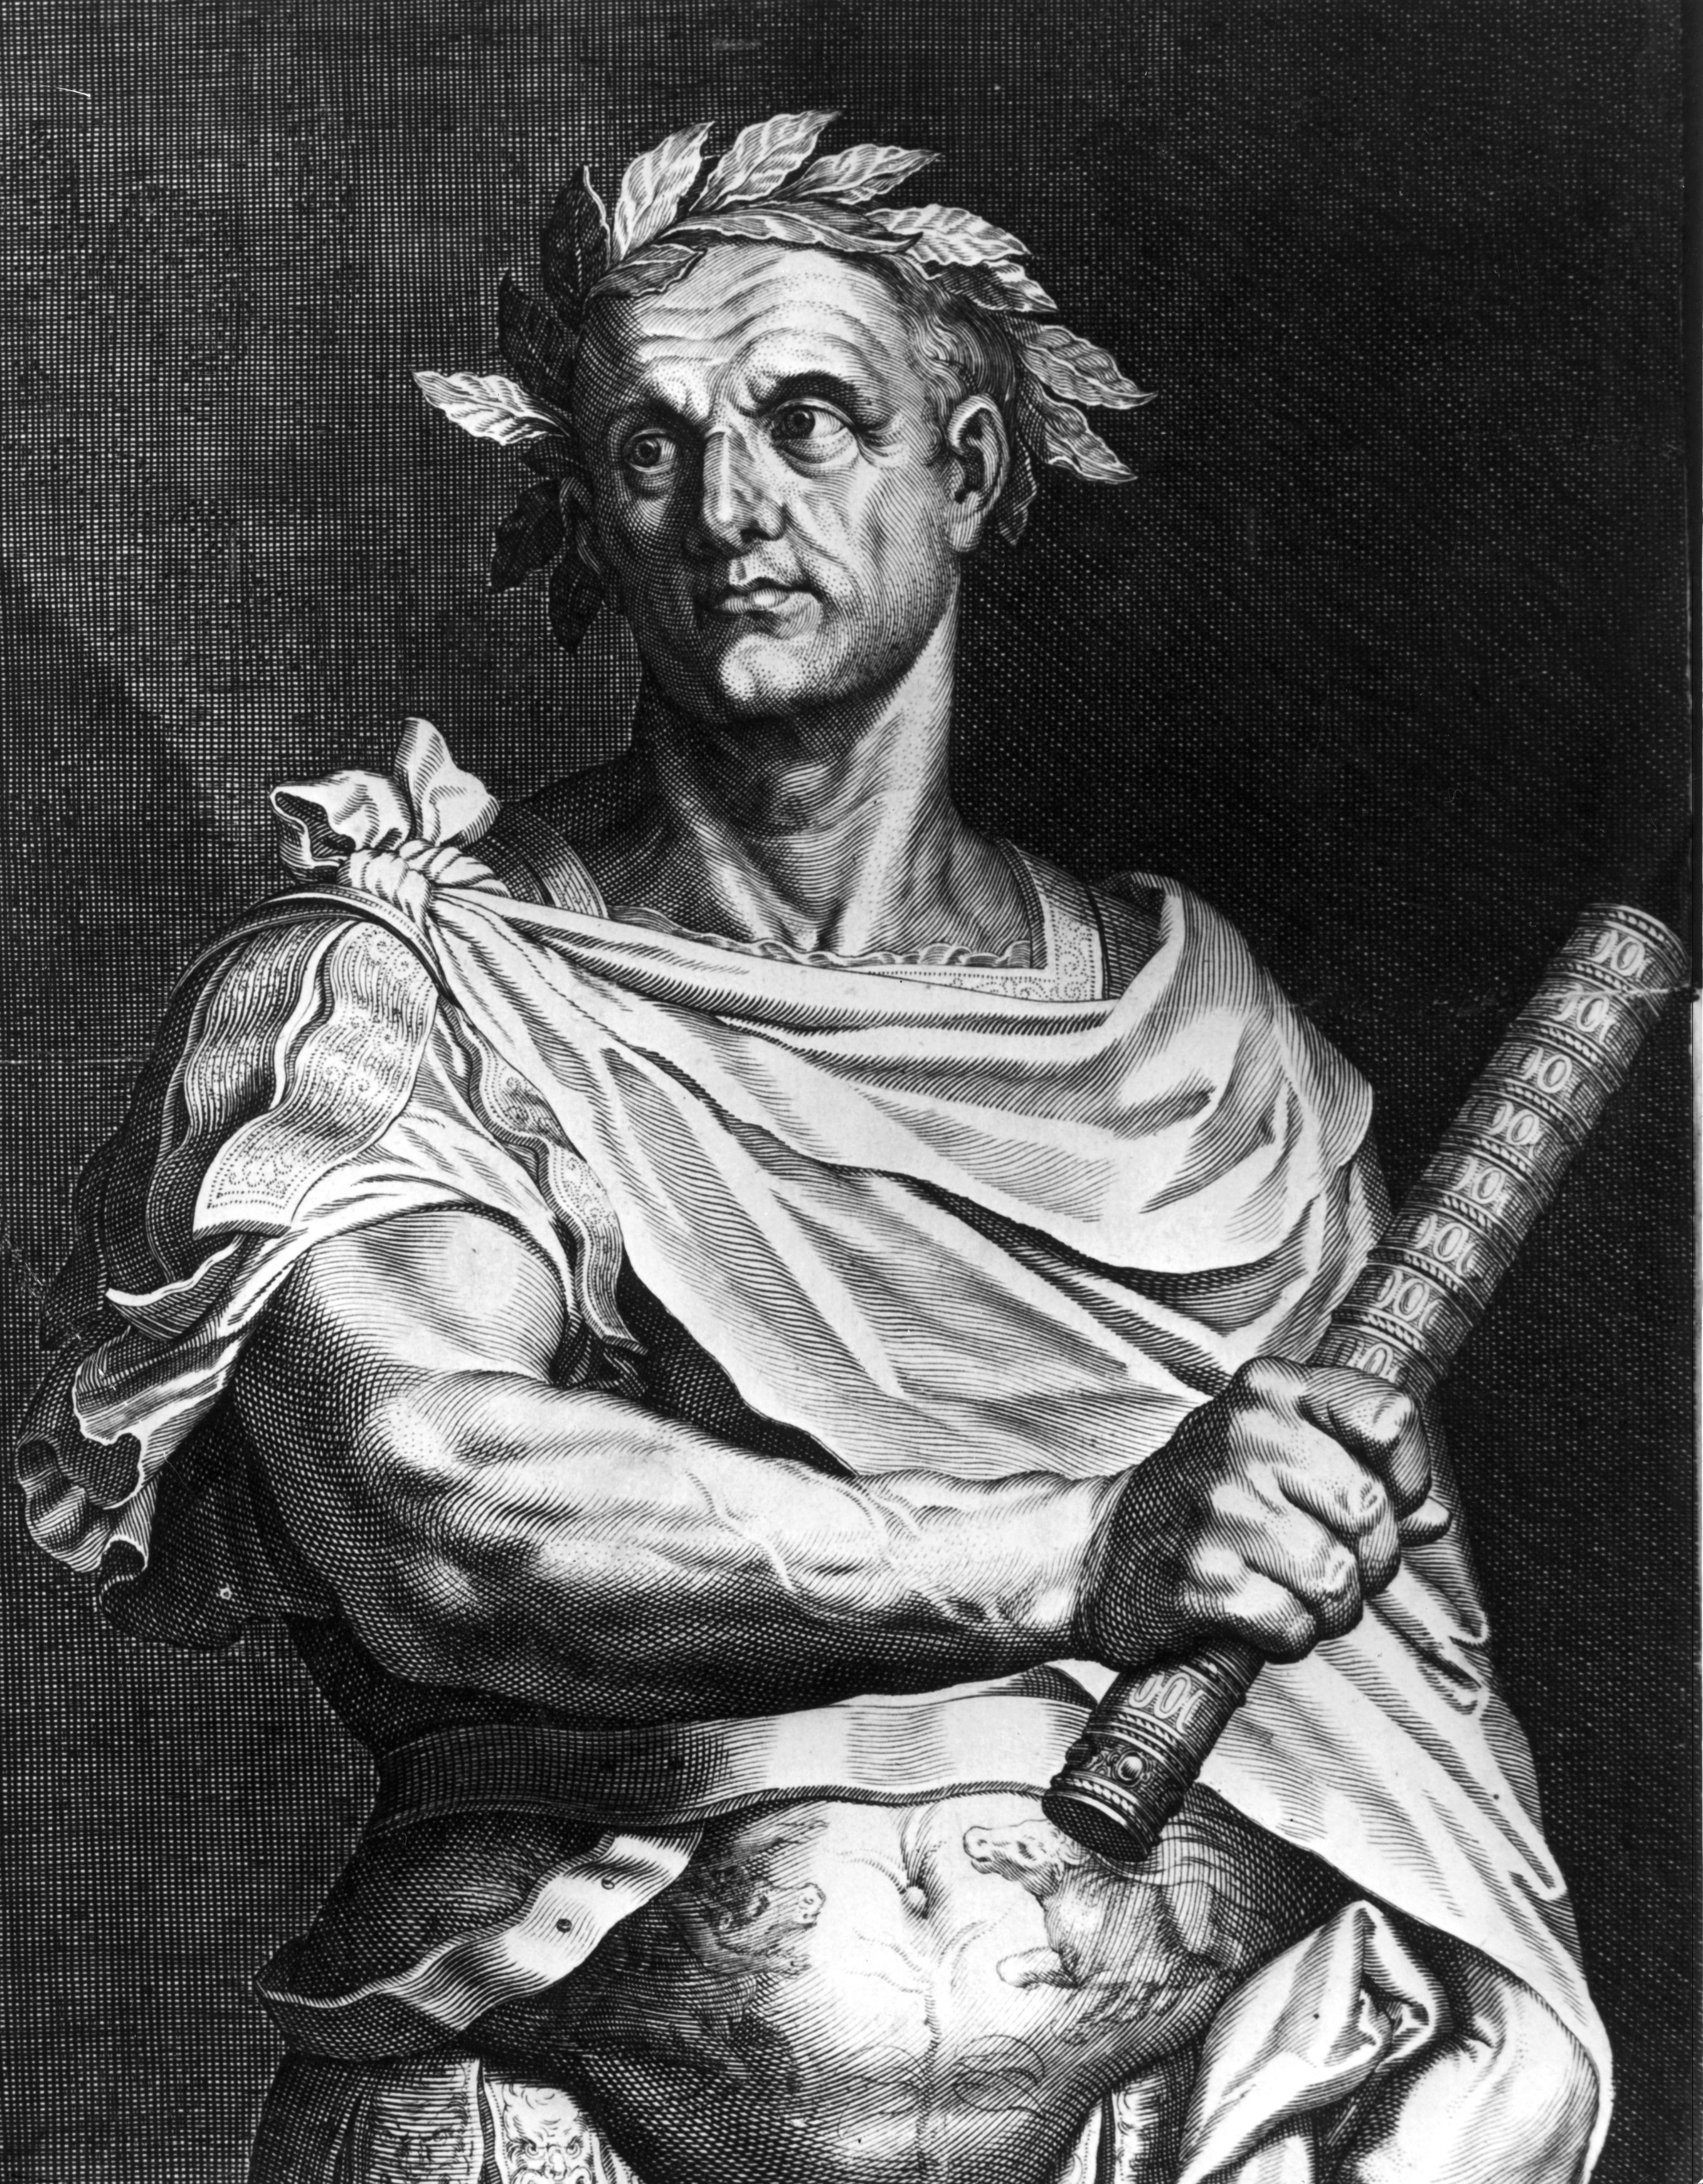 Circa 50 BC, Julius Caesar (102 BC - 44 BC) as dictator of Rome wearing a crown of laurel and holding a symbol of office